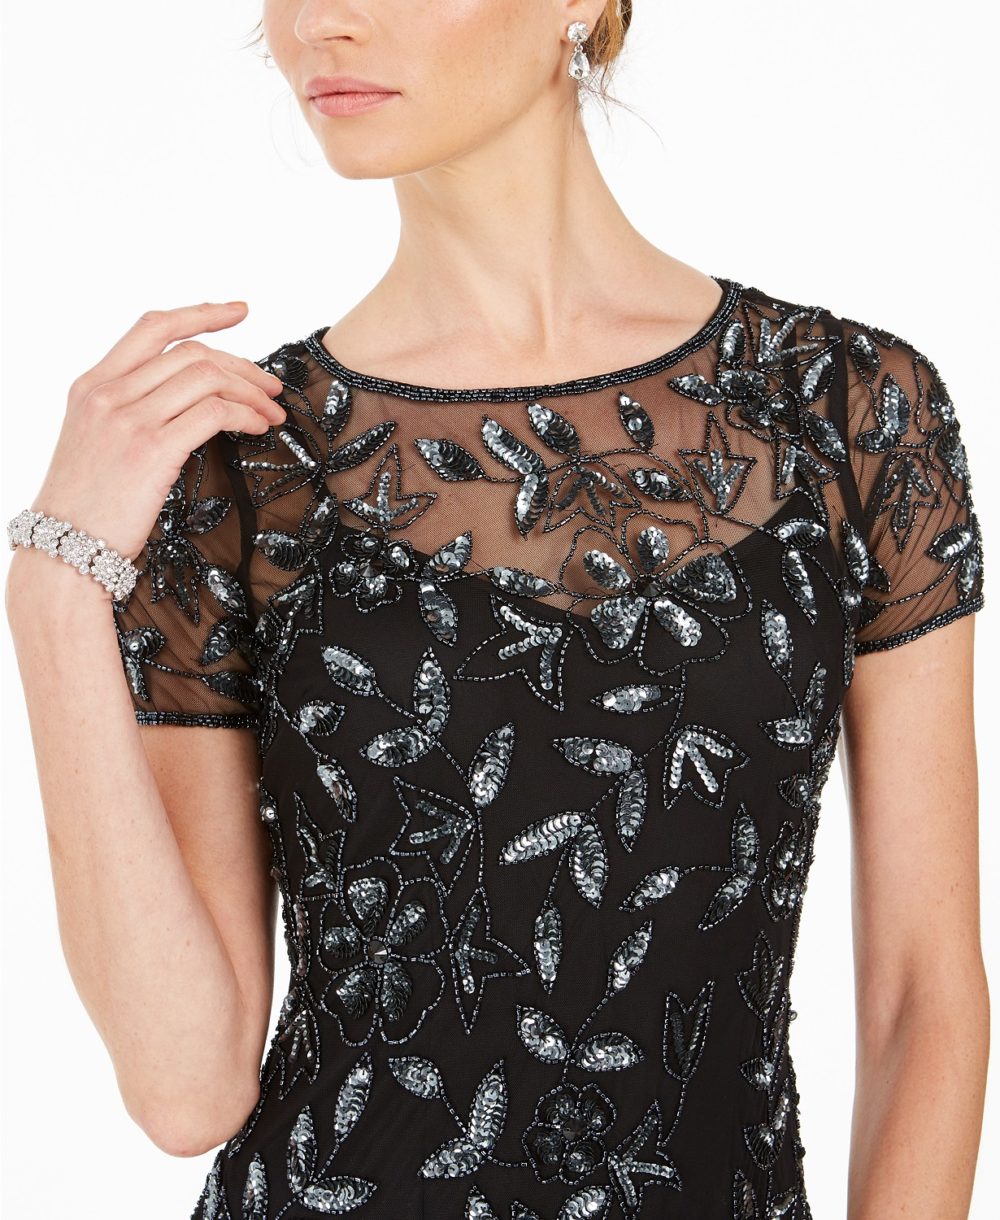 woocommerce-673321-2209615.cloudwaysapps.com-adrianna-papell-womens-black-floral-beaded-gown-dress